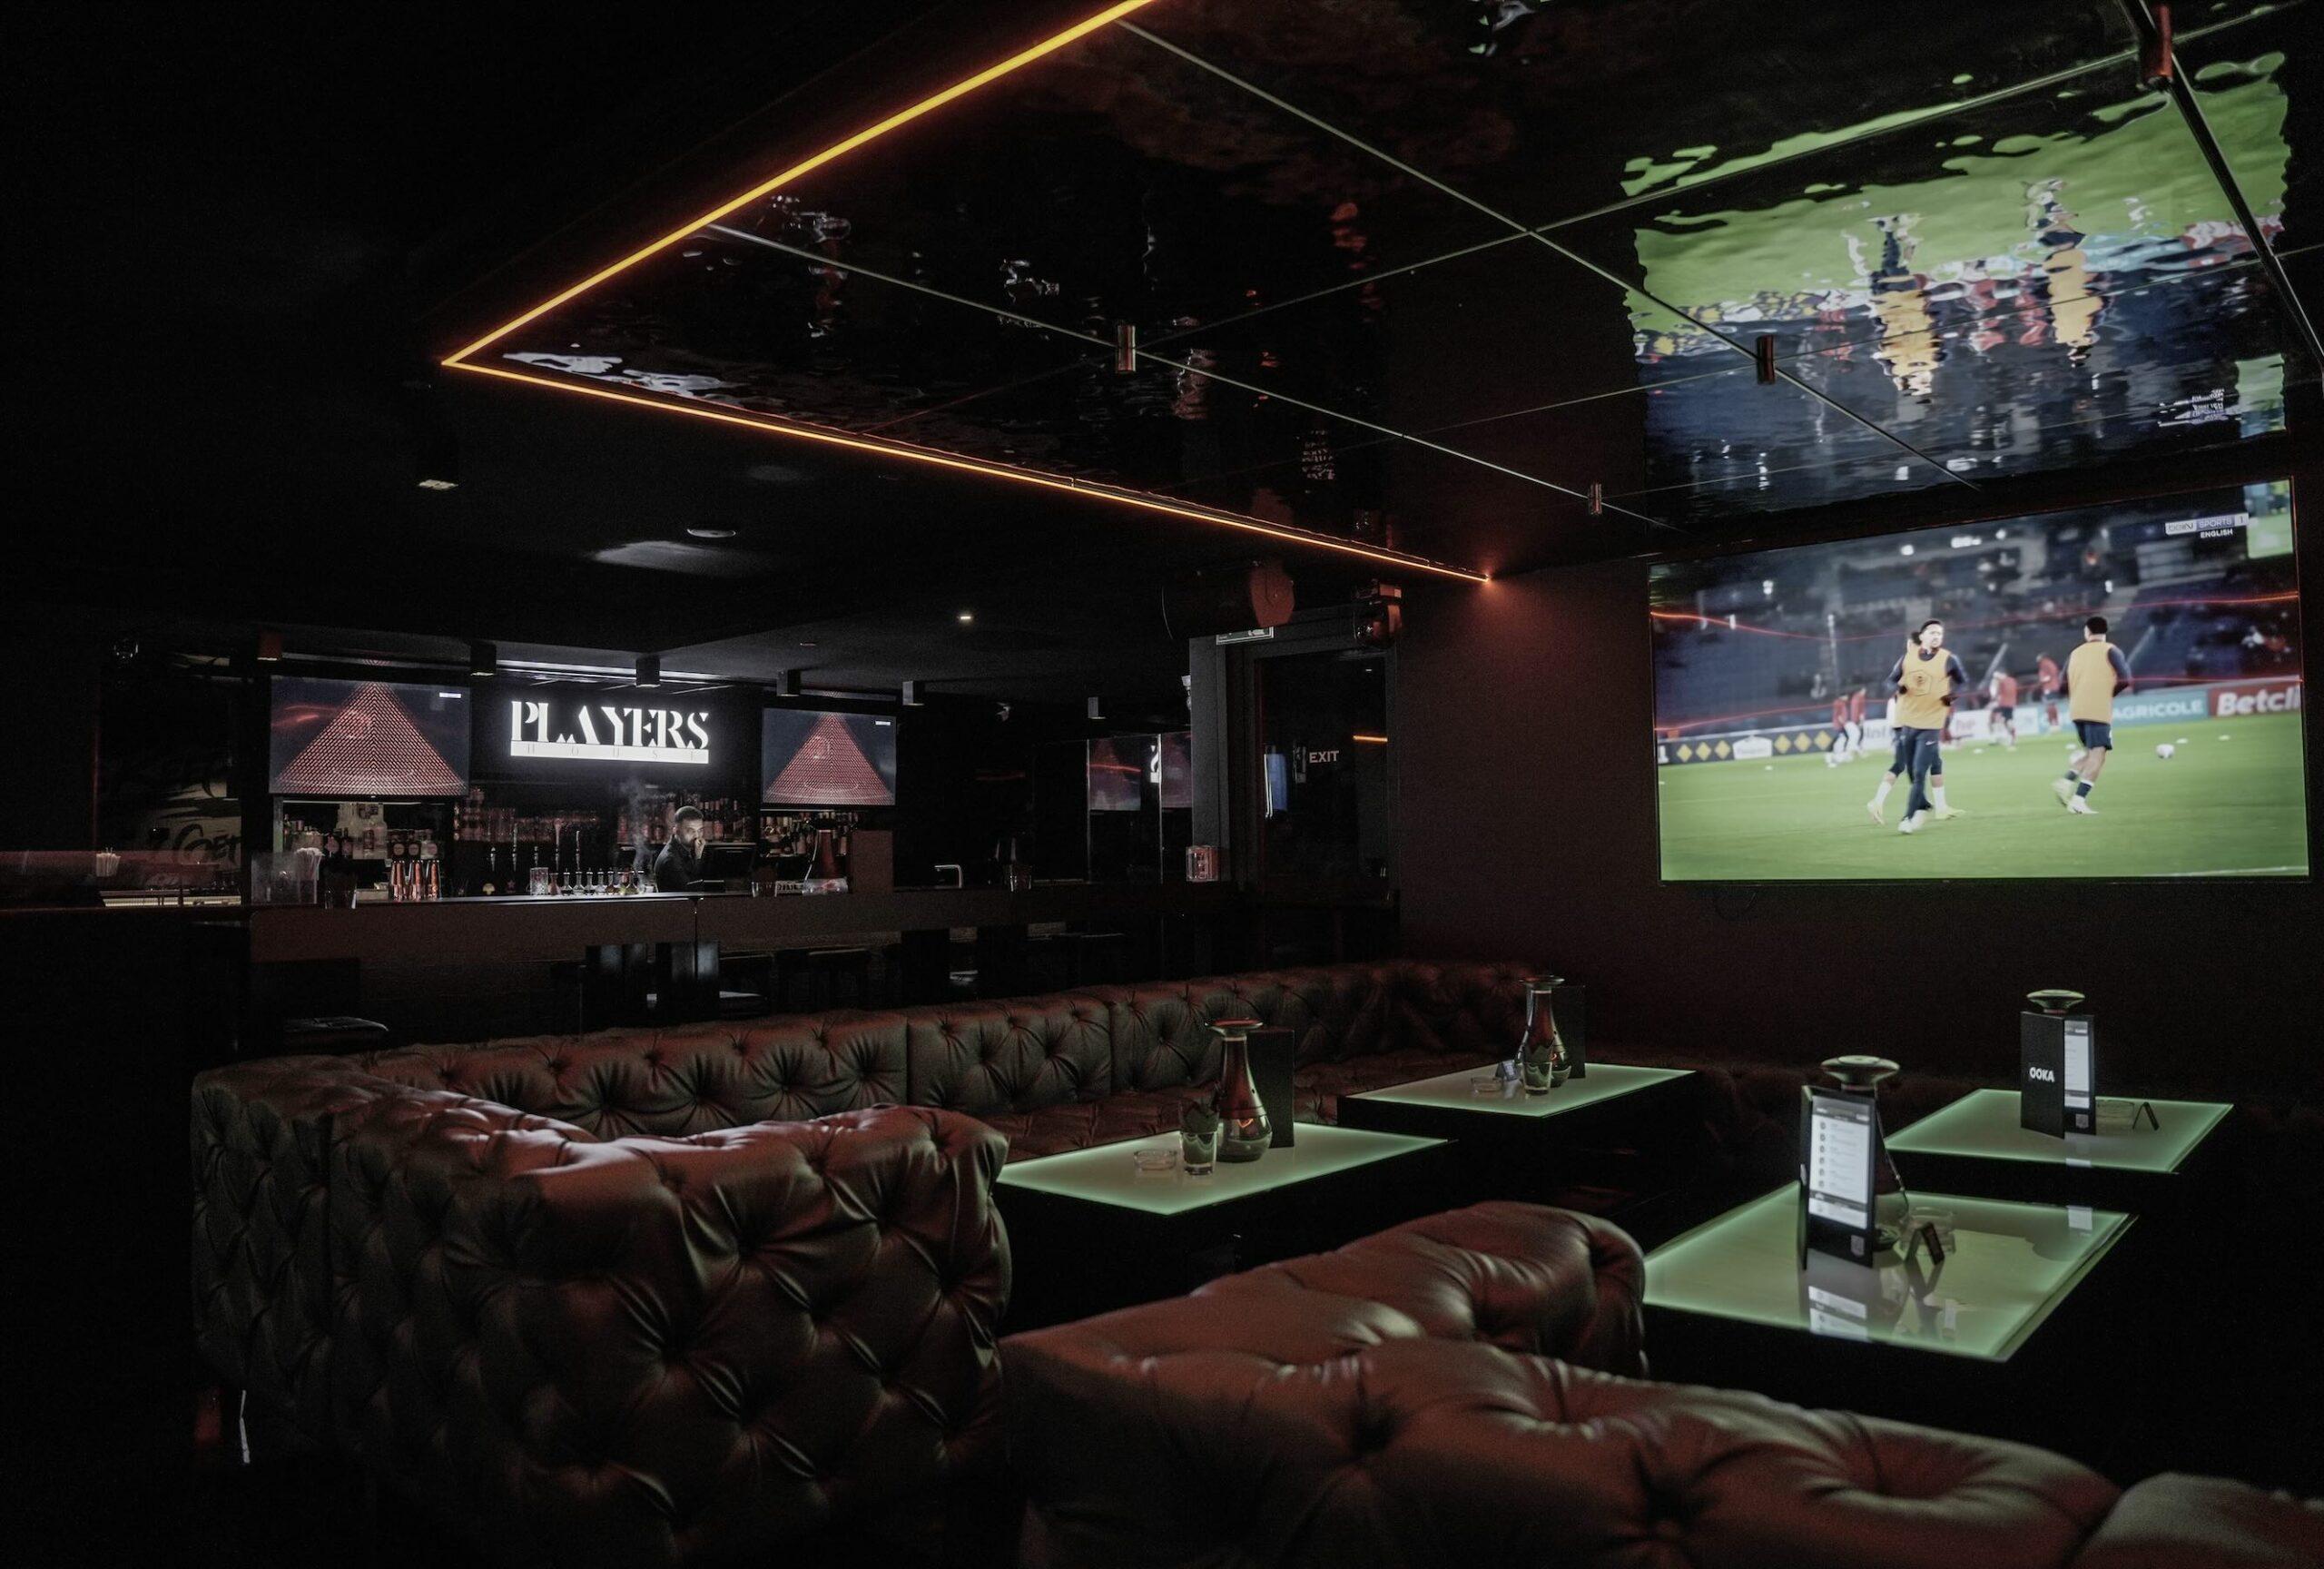 Players House raises the bar for sports lounges in Dubai